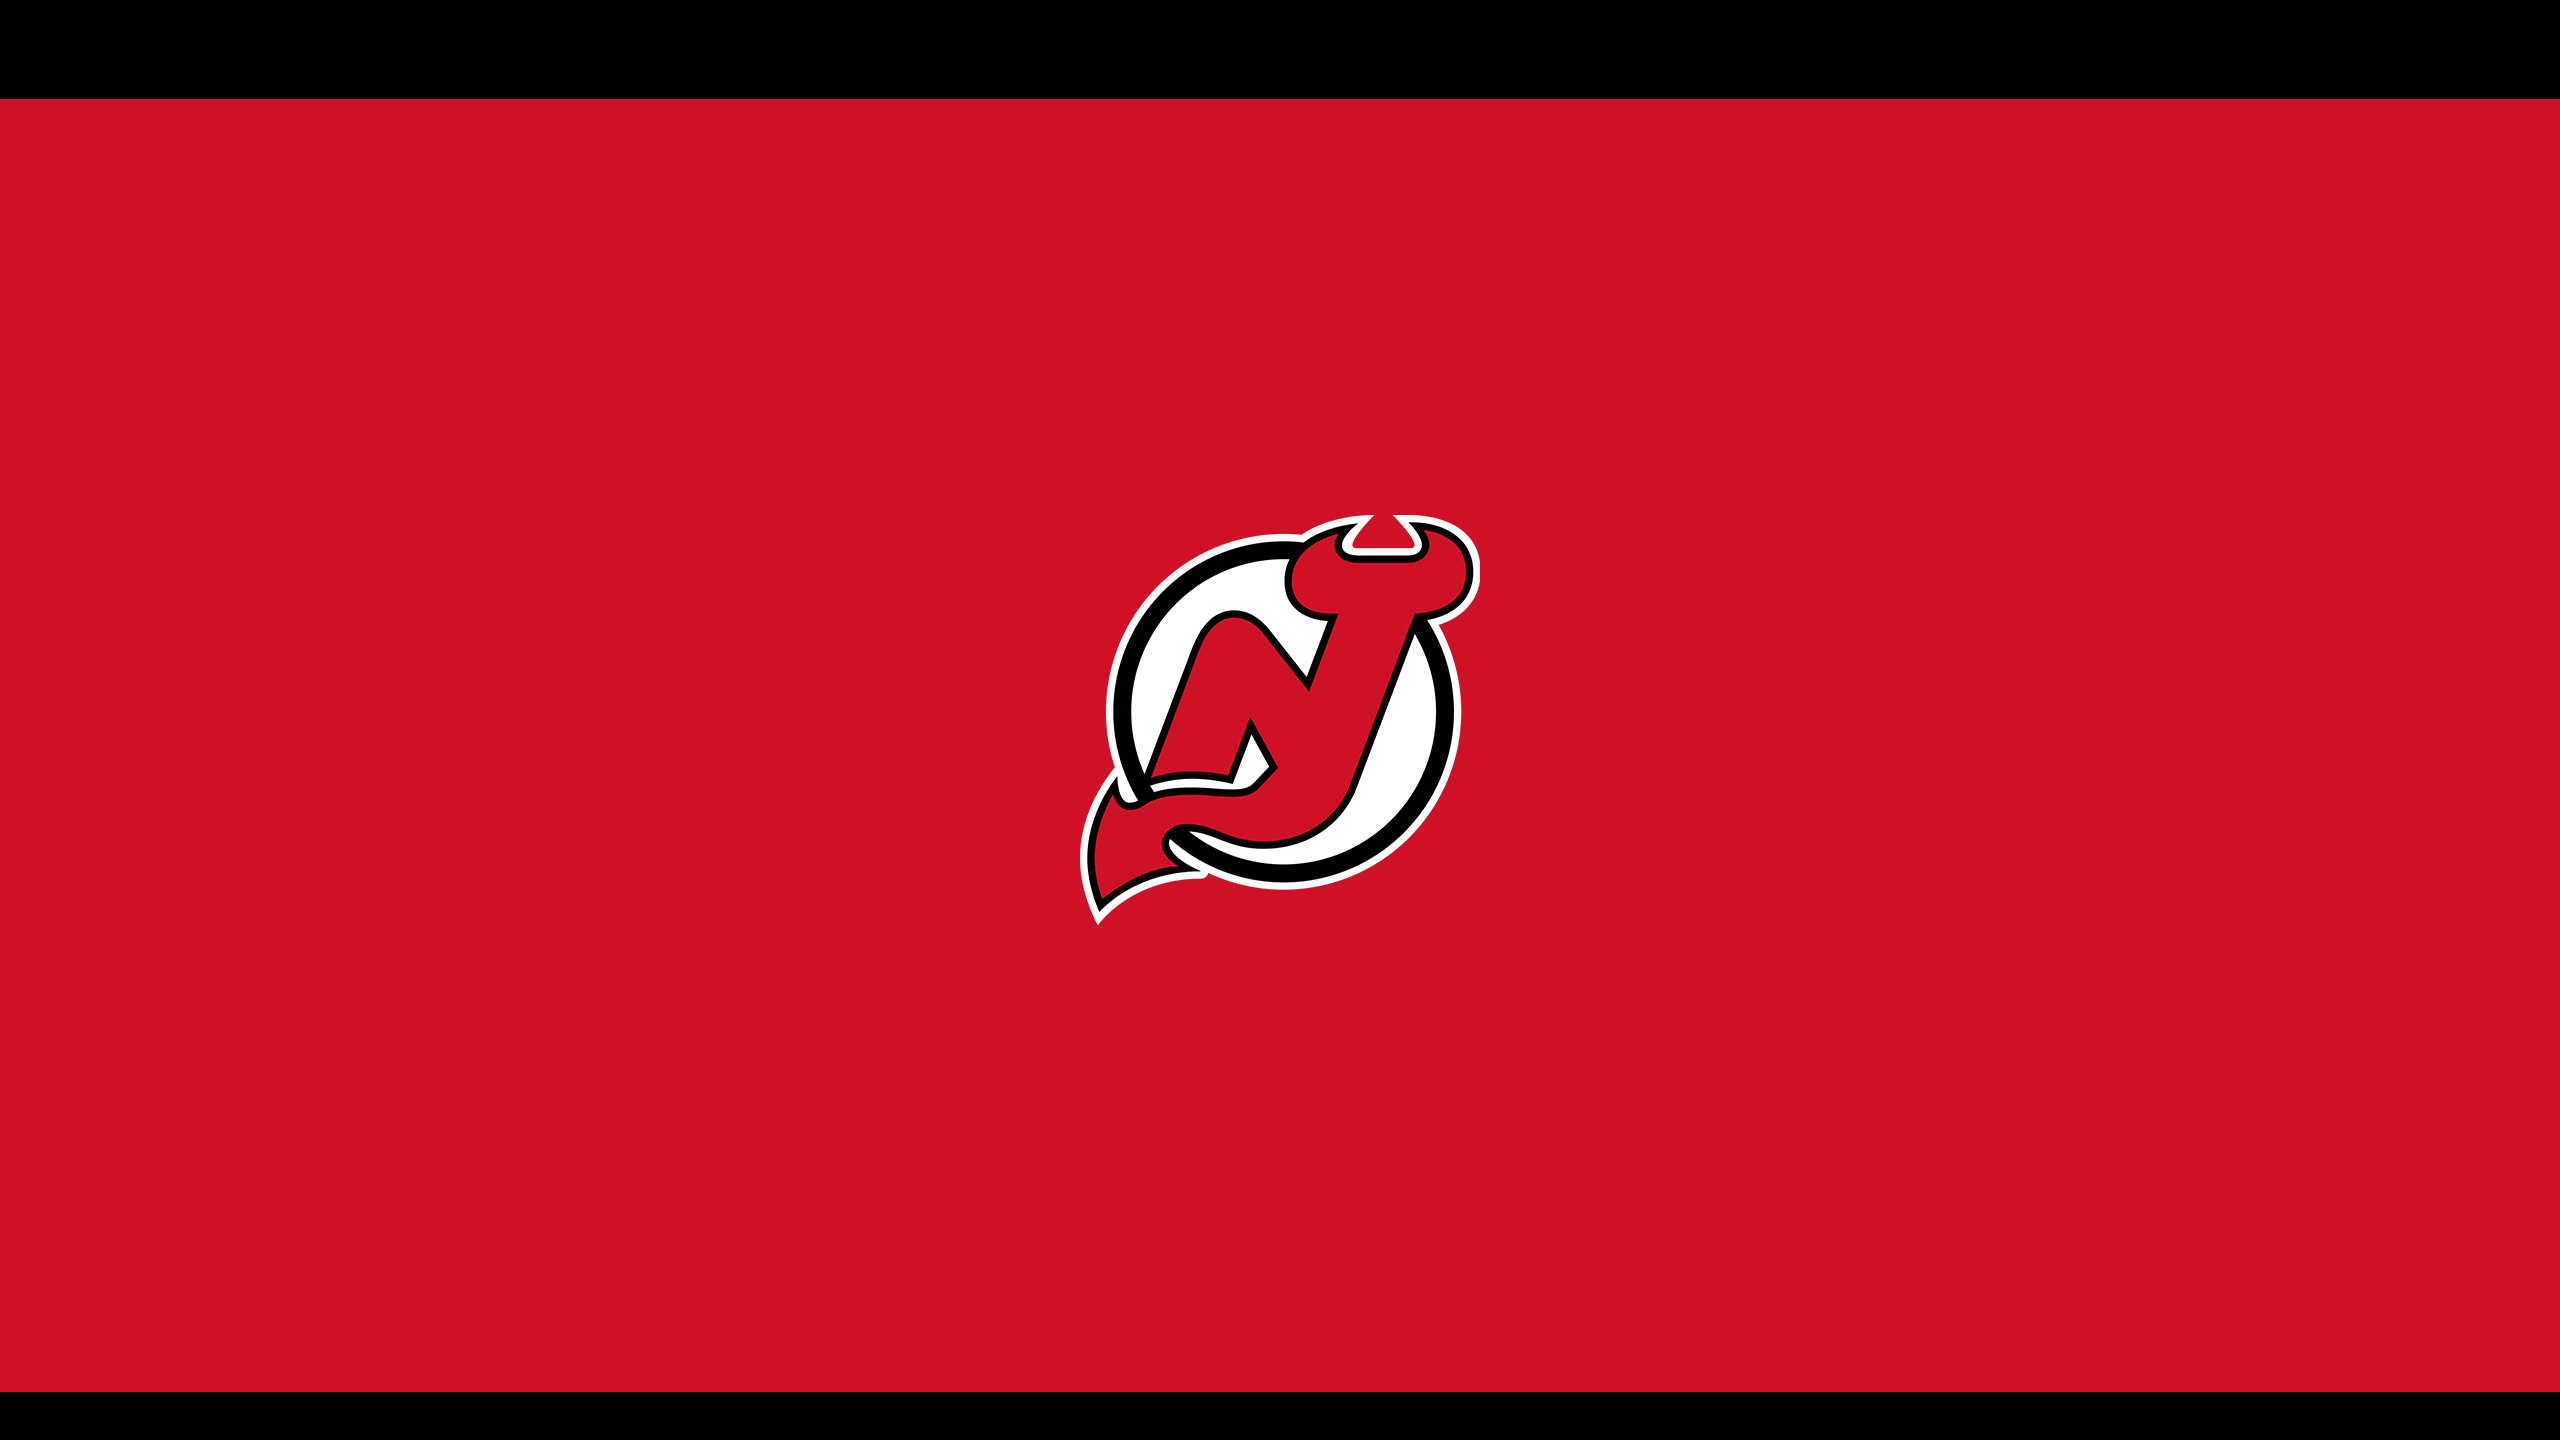 New Jersey Devils - NHL - Square Bettor